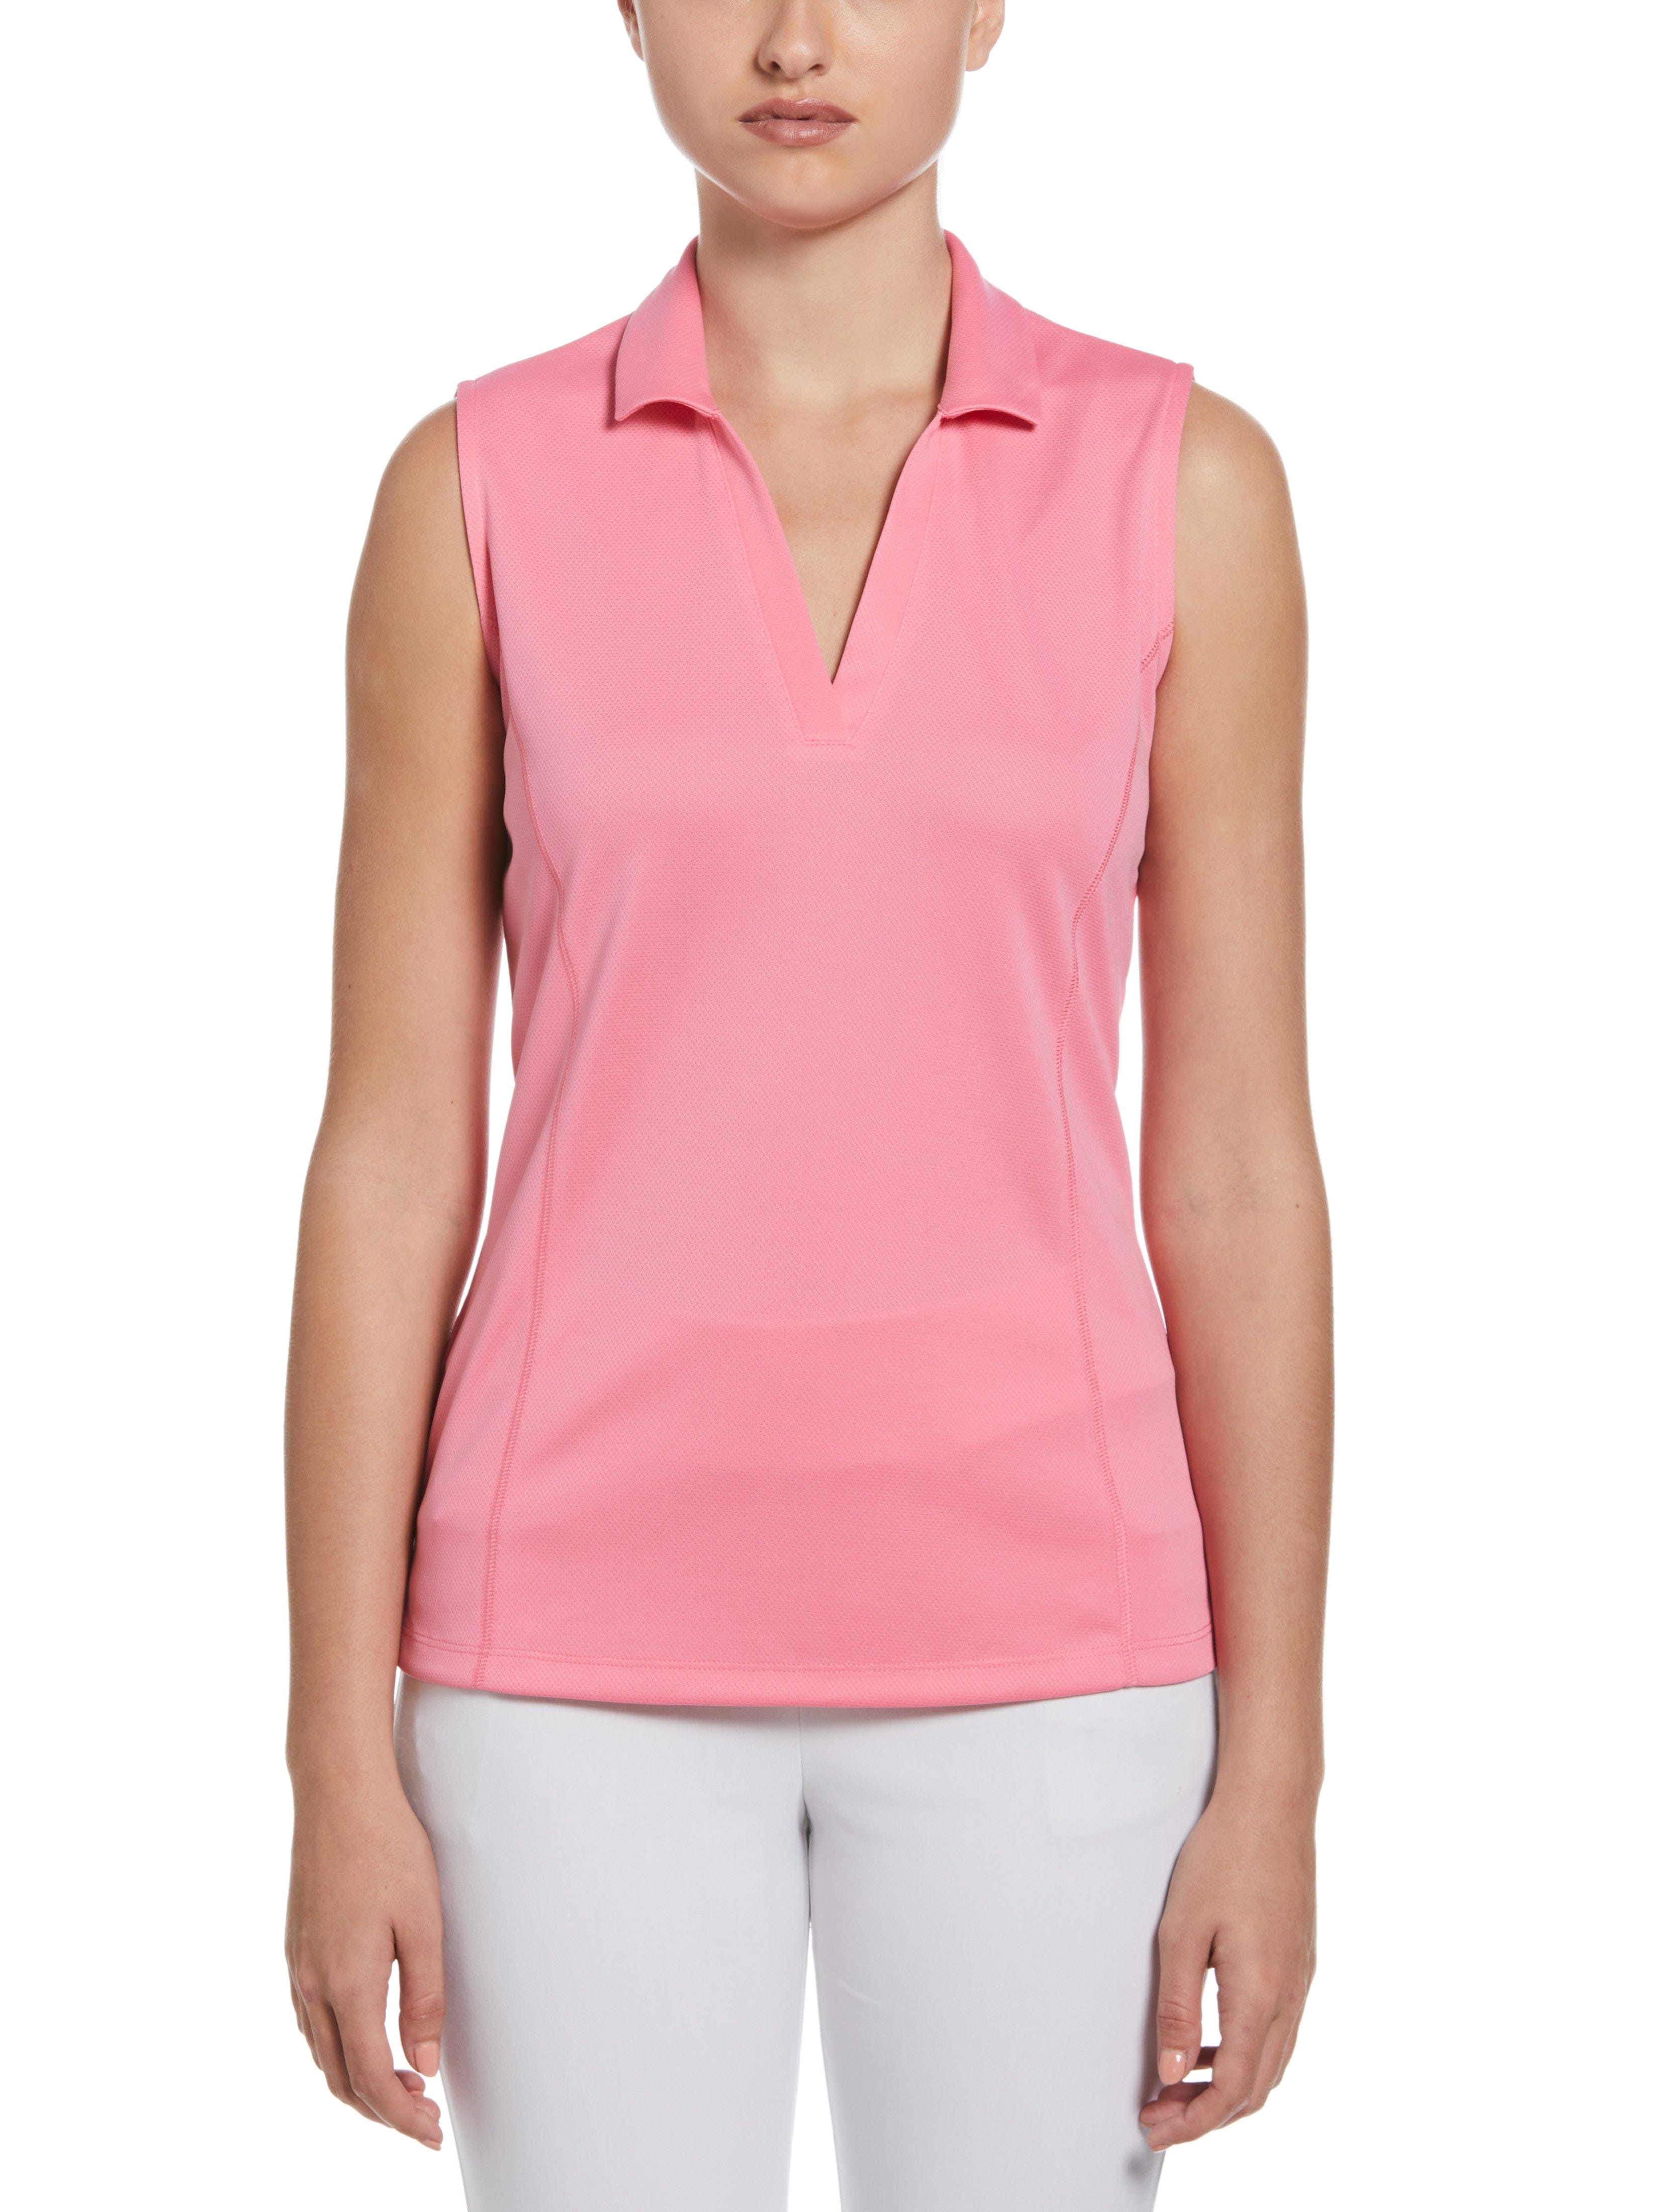 PGA TOUR Apparel Womens AirFlux™ Solid Sleeveless Golf Polo Shirt, Size XL, Flowering Ginger Pink, 100% Polyester | Golf Apparel Shop